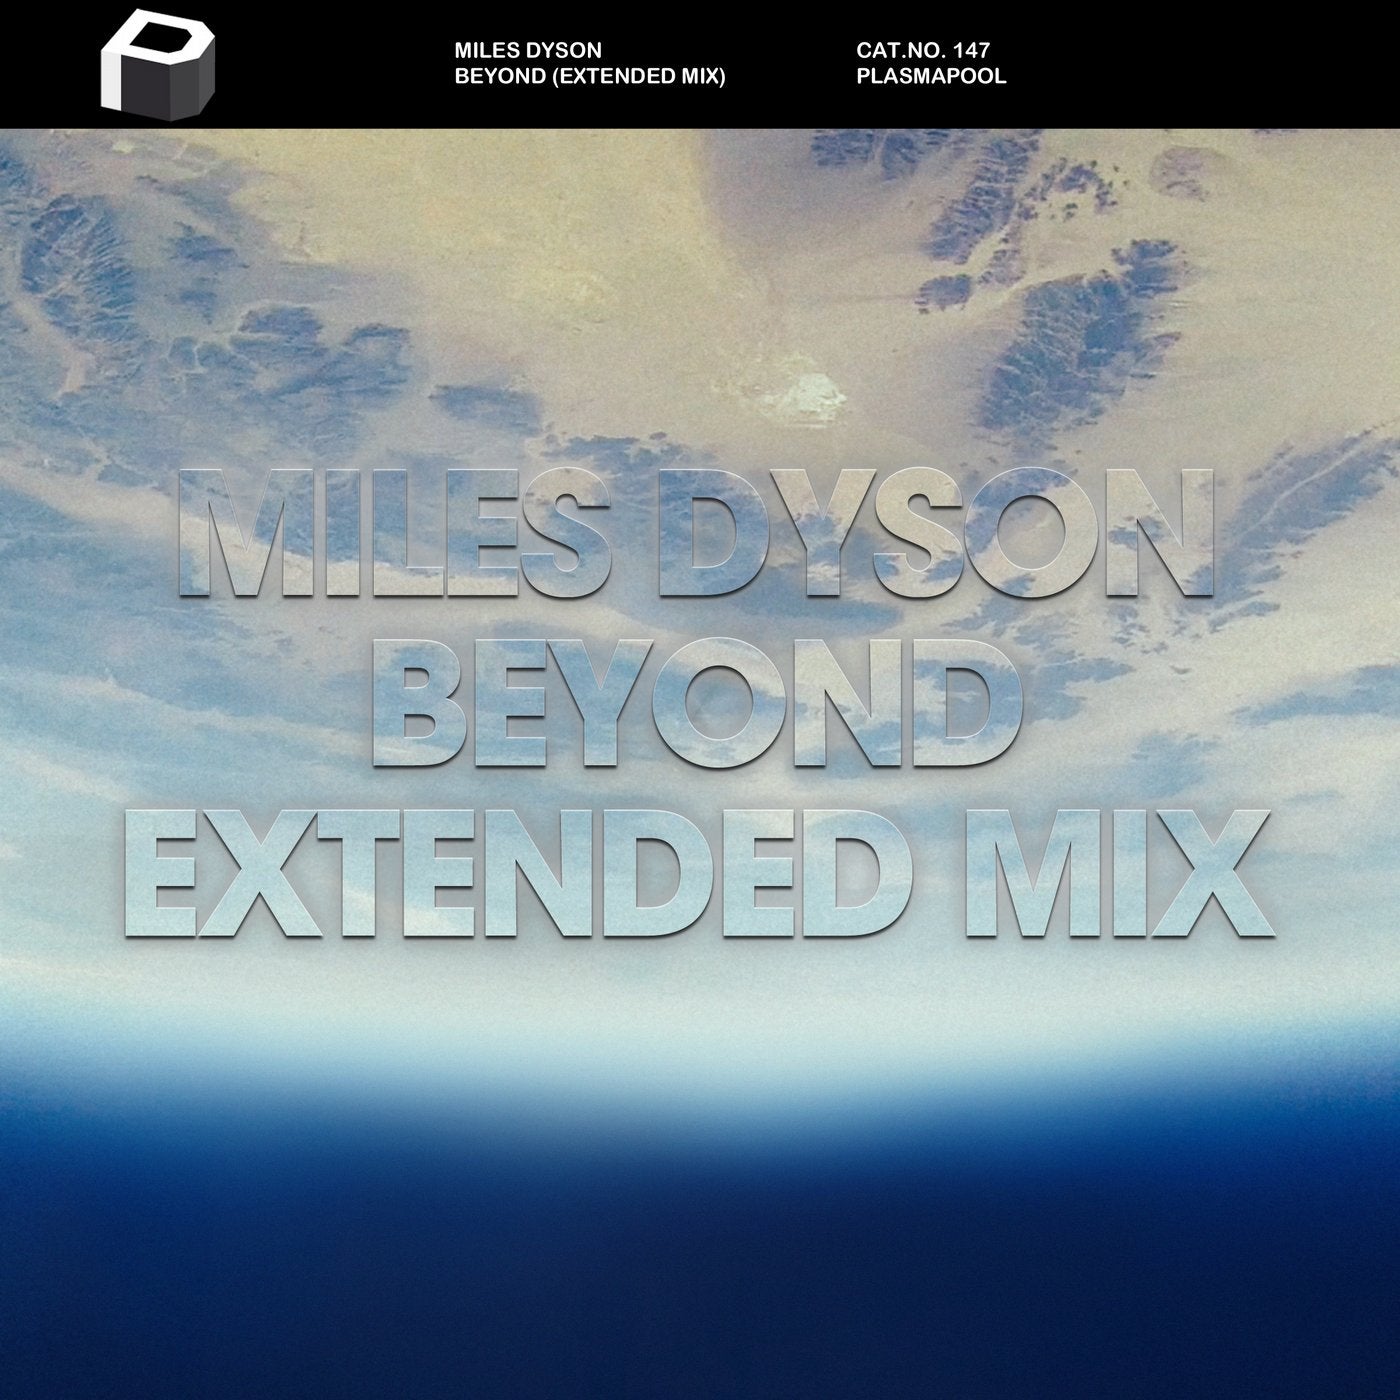 Beyond (Extended Mix)